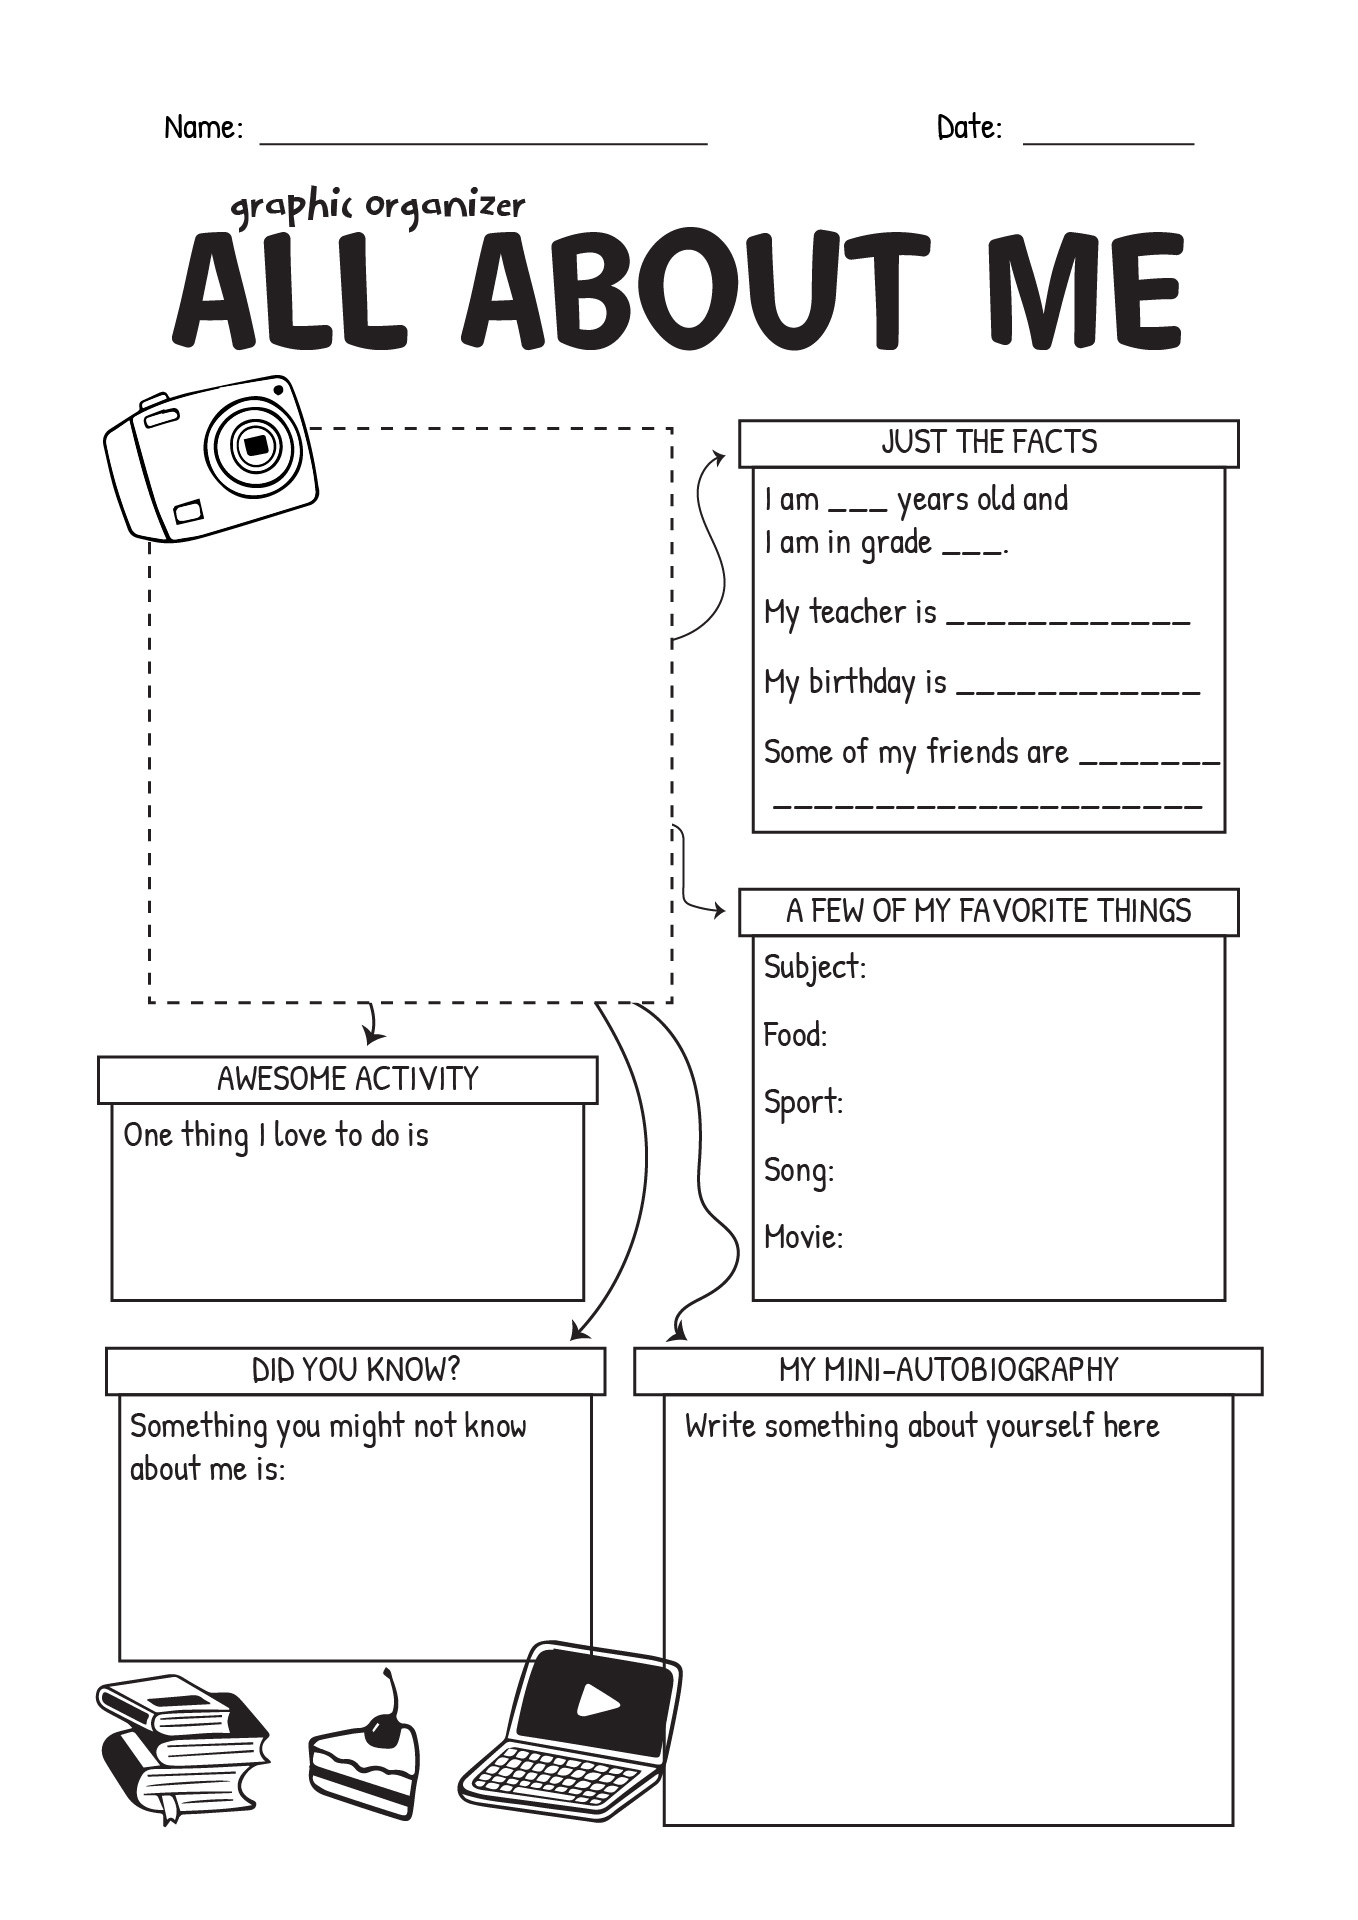 All About Me Graphic Organizer